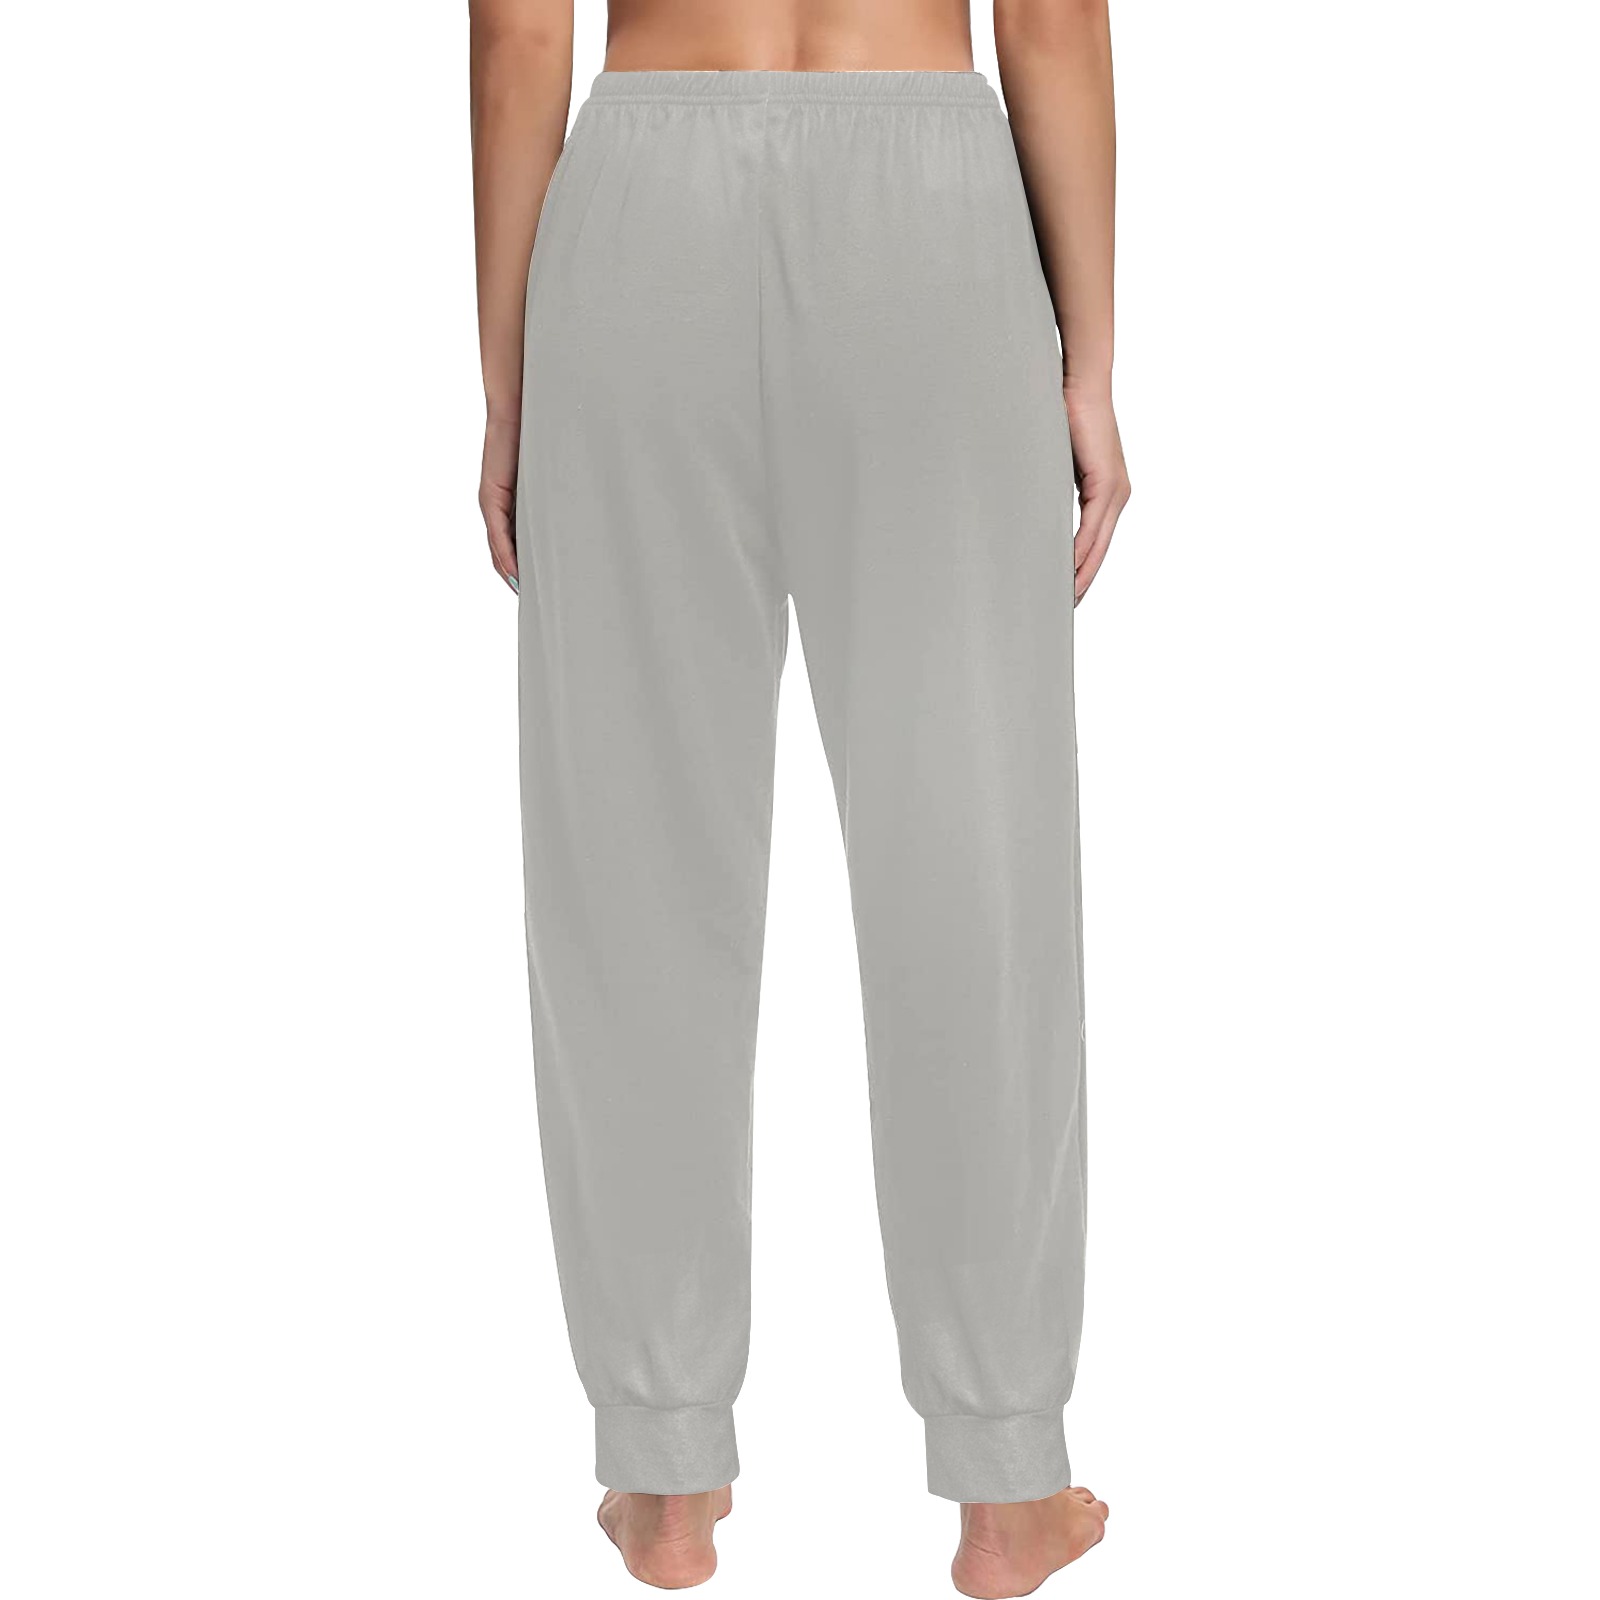 Pants gray with single logo Women's All Over Print Pajama Trousers